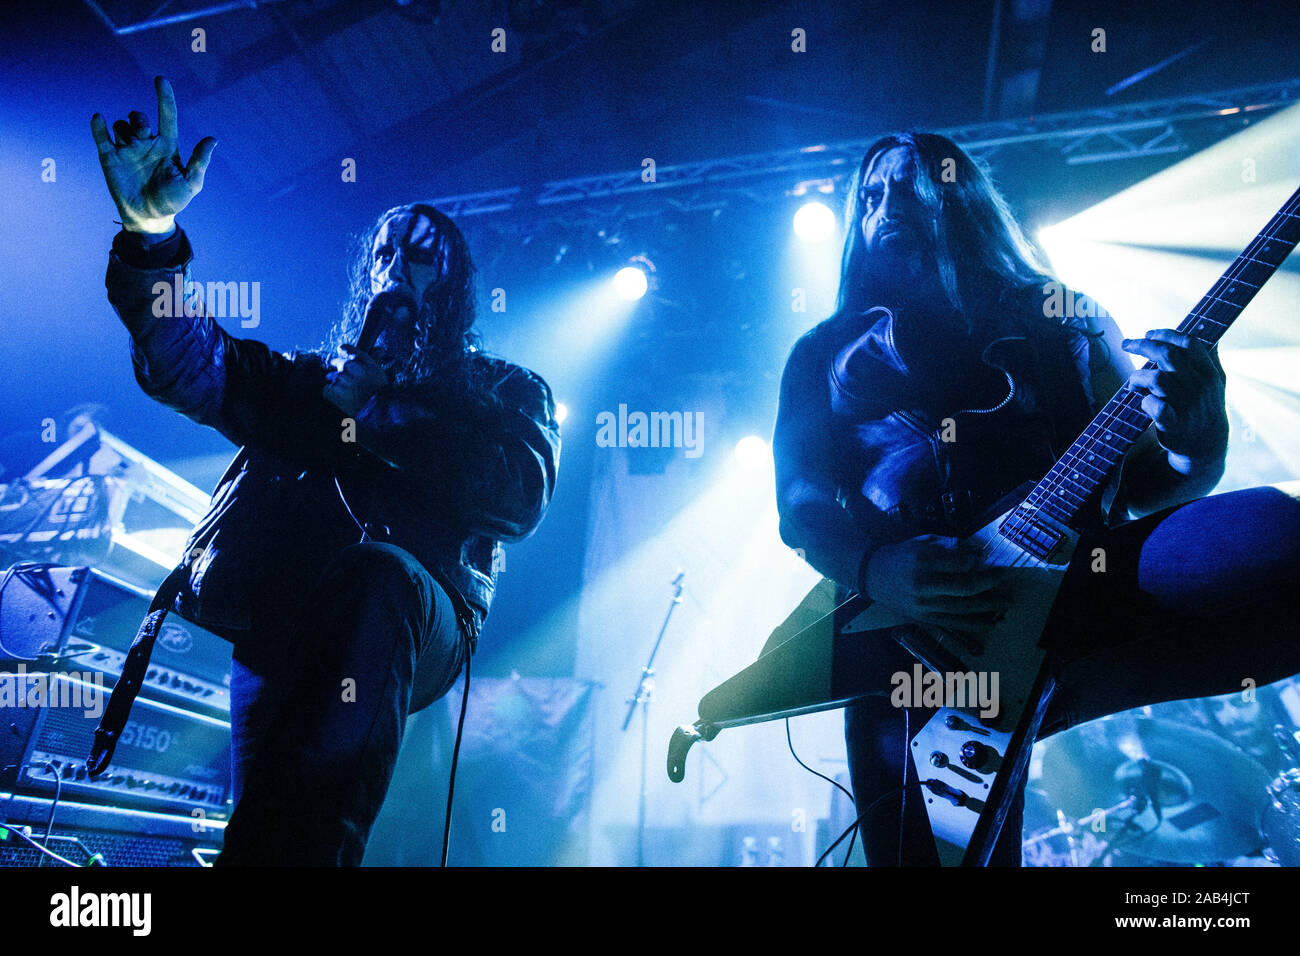 Copenhagen, Denmark. 24th, November 2019. The Norwegian black metal band Gaahls Wyrd performs a live concert at Pumpehuset in Copenhagen. Here vocalist Gaahl is seen live on stage. (Photo credit: Gonzales Photo - Malthe Ivarsson). Stock Photo